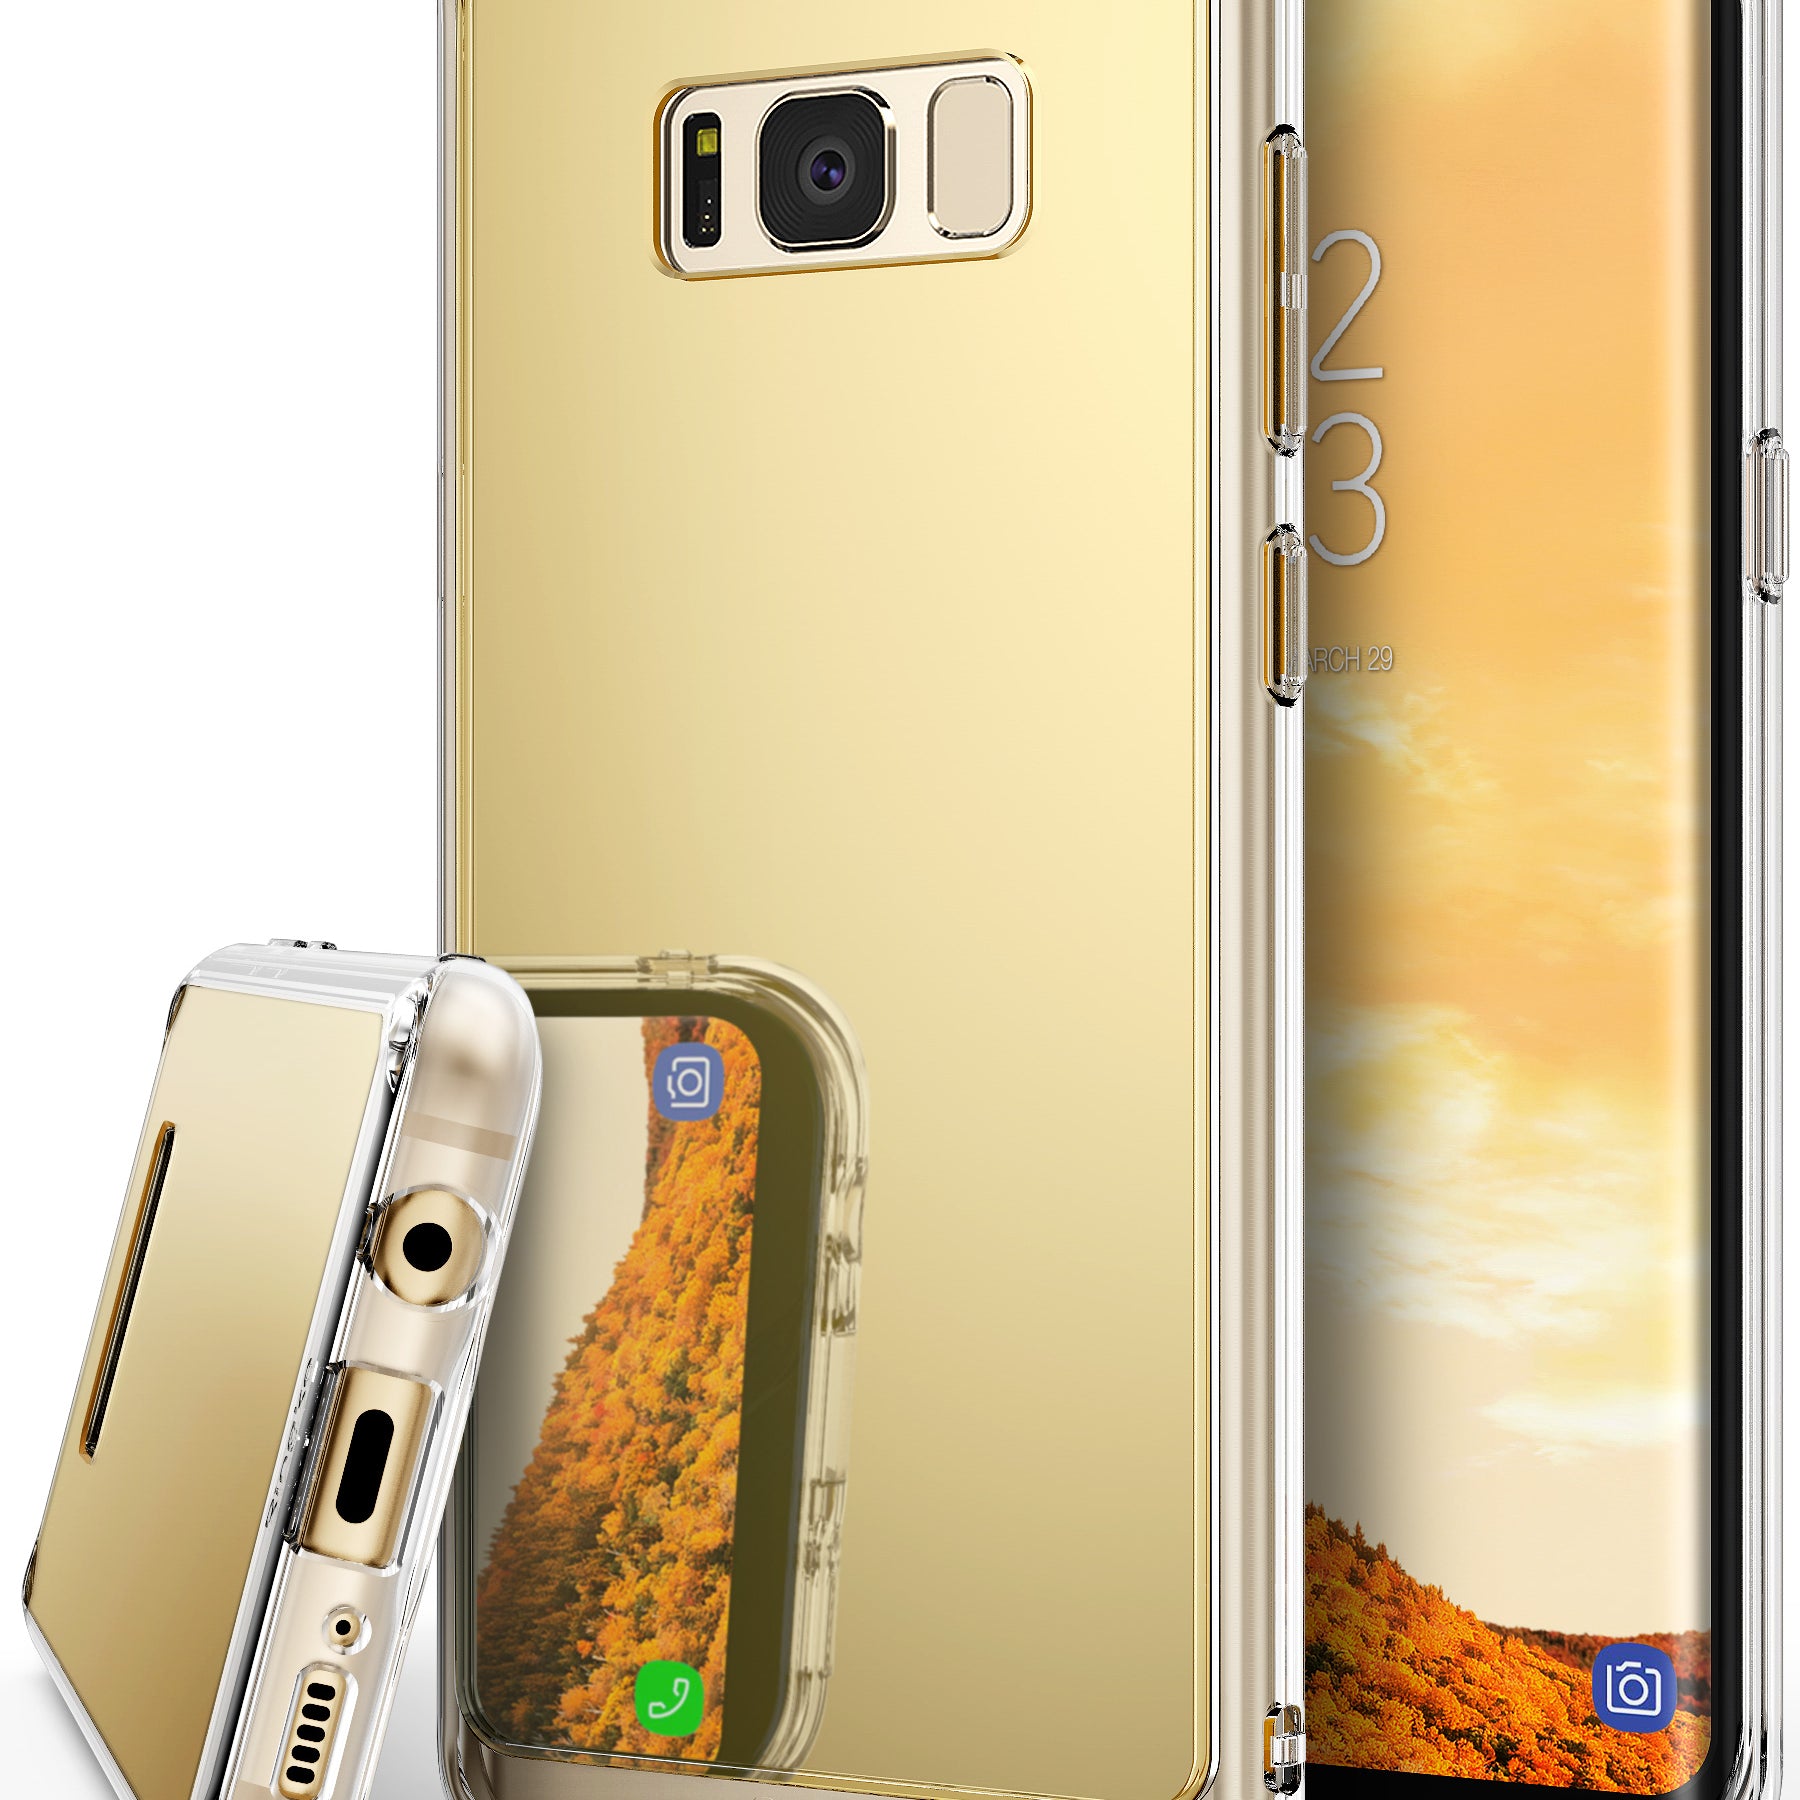 ringke mirror back cover case for galaxy s8 plus royal gold